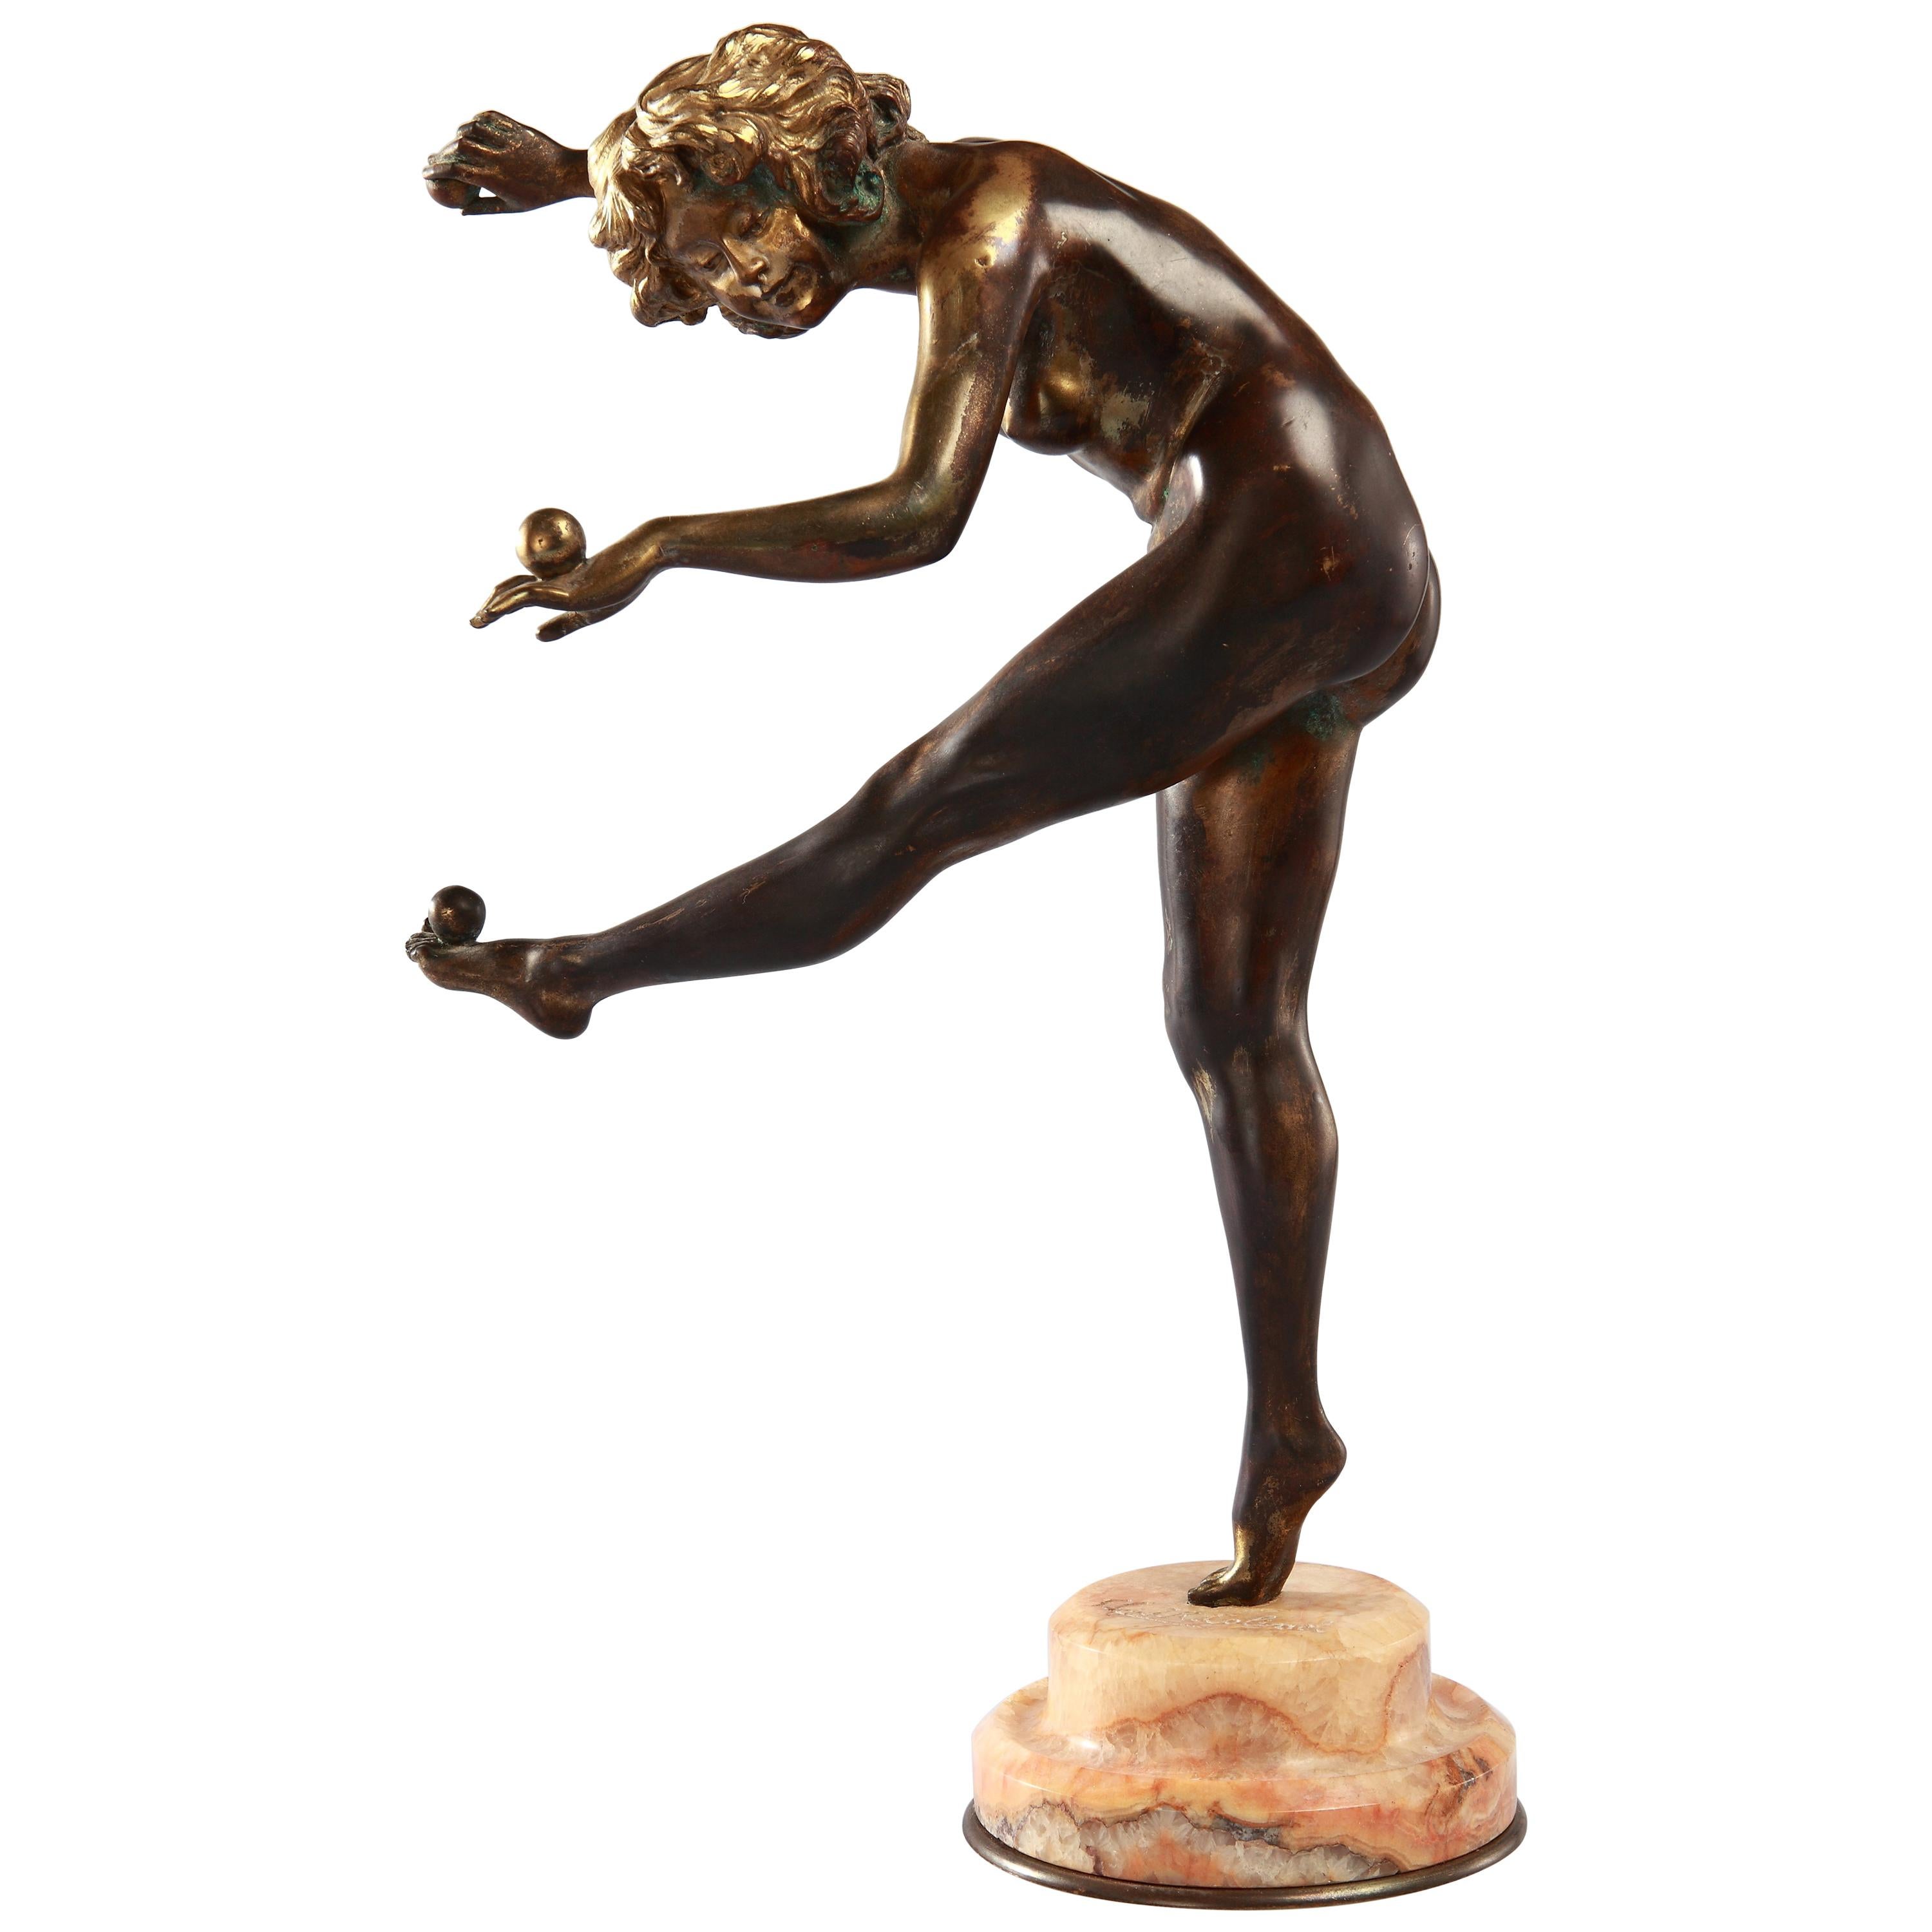 Art Deco Bronze "The Juggler" by Claire Colinet